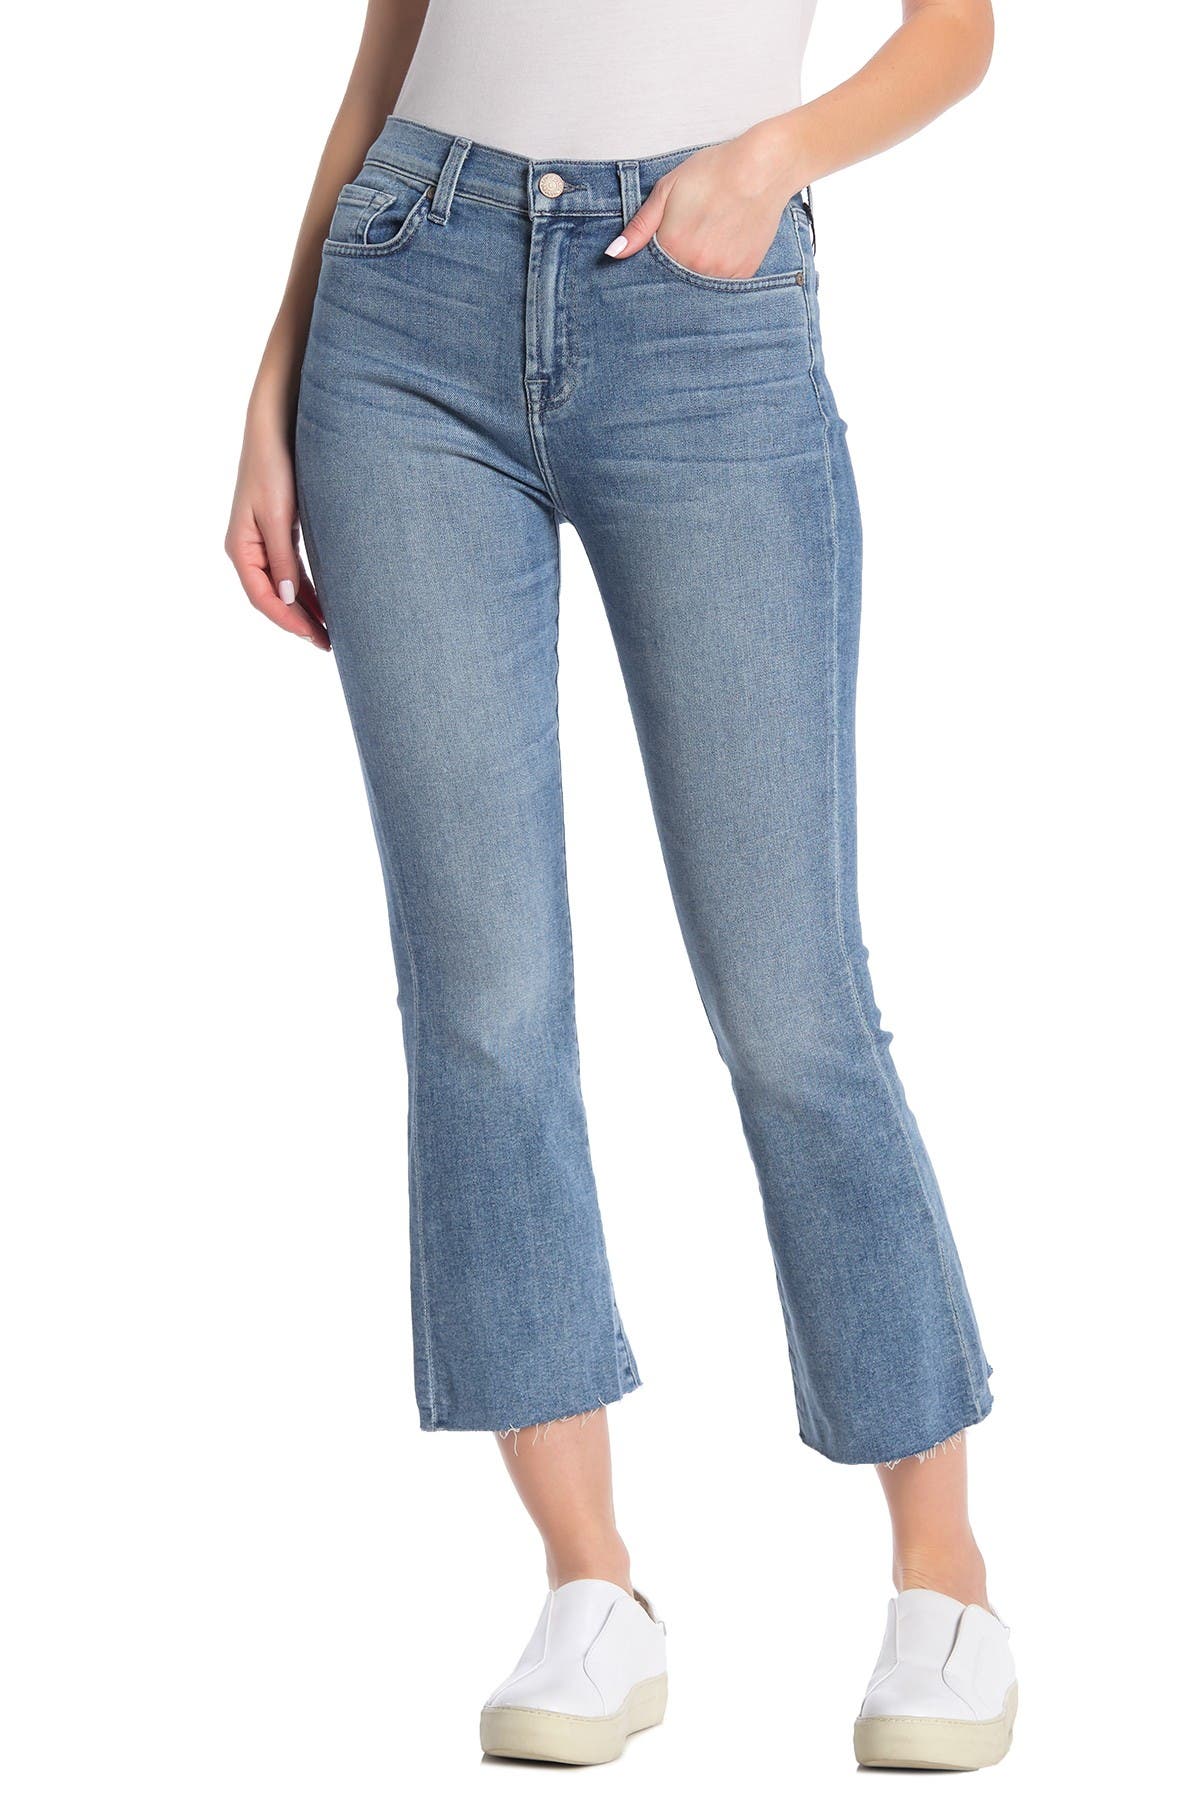 7 FOR ALL MANKIND HIGH WAIST SLIM KICK CROPPED FLARE JEANS,190392688518